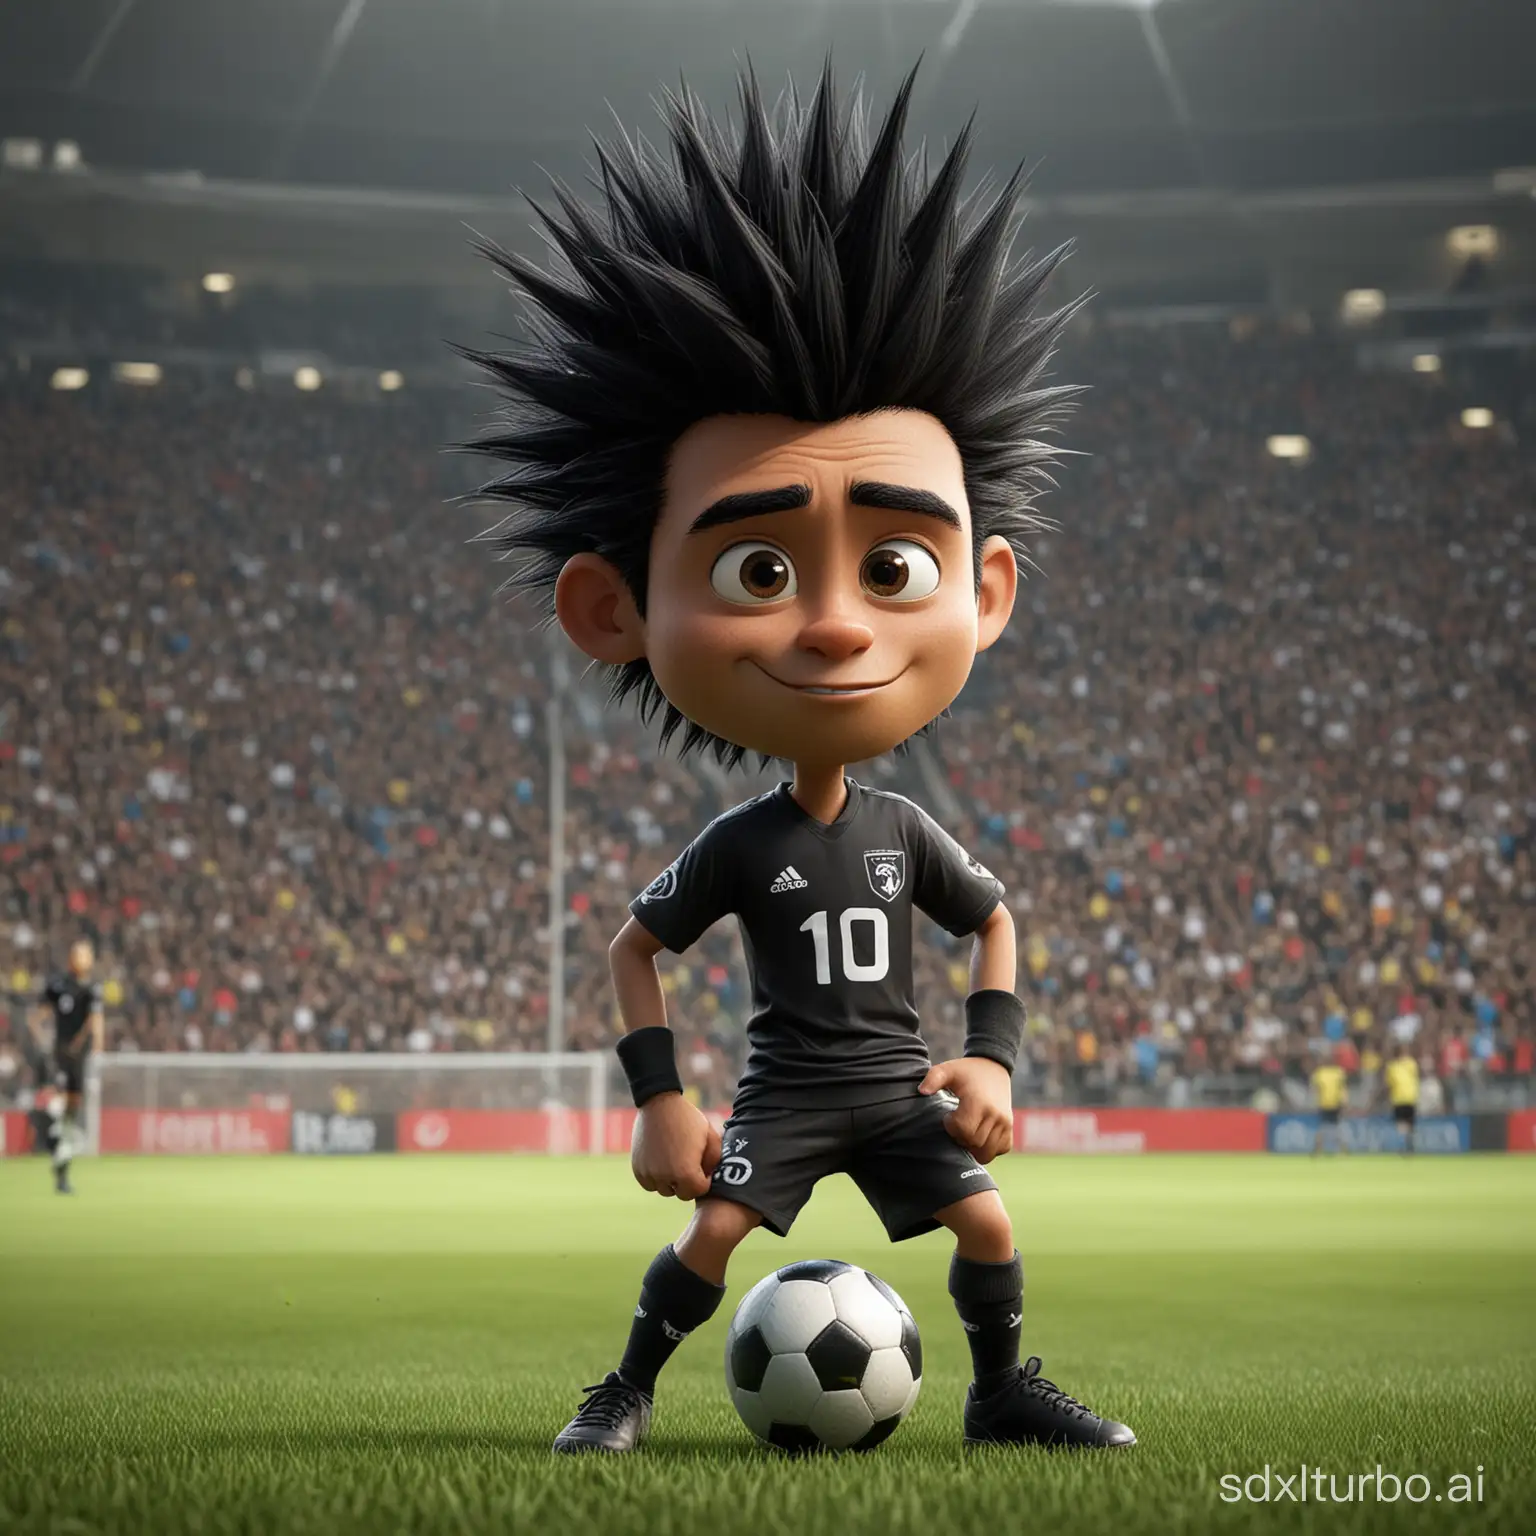 Indonesian-Soccer-Player-with-Spiky-Hair-Playing-in-Pixar-Cartoon-Style